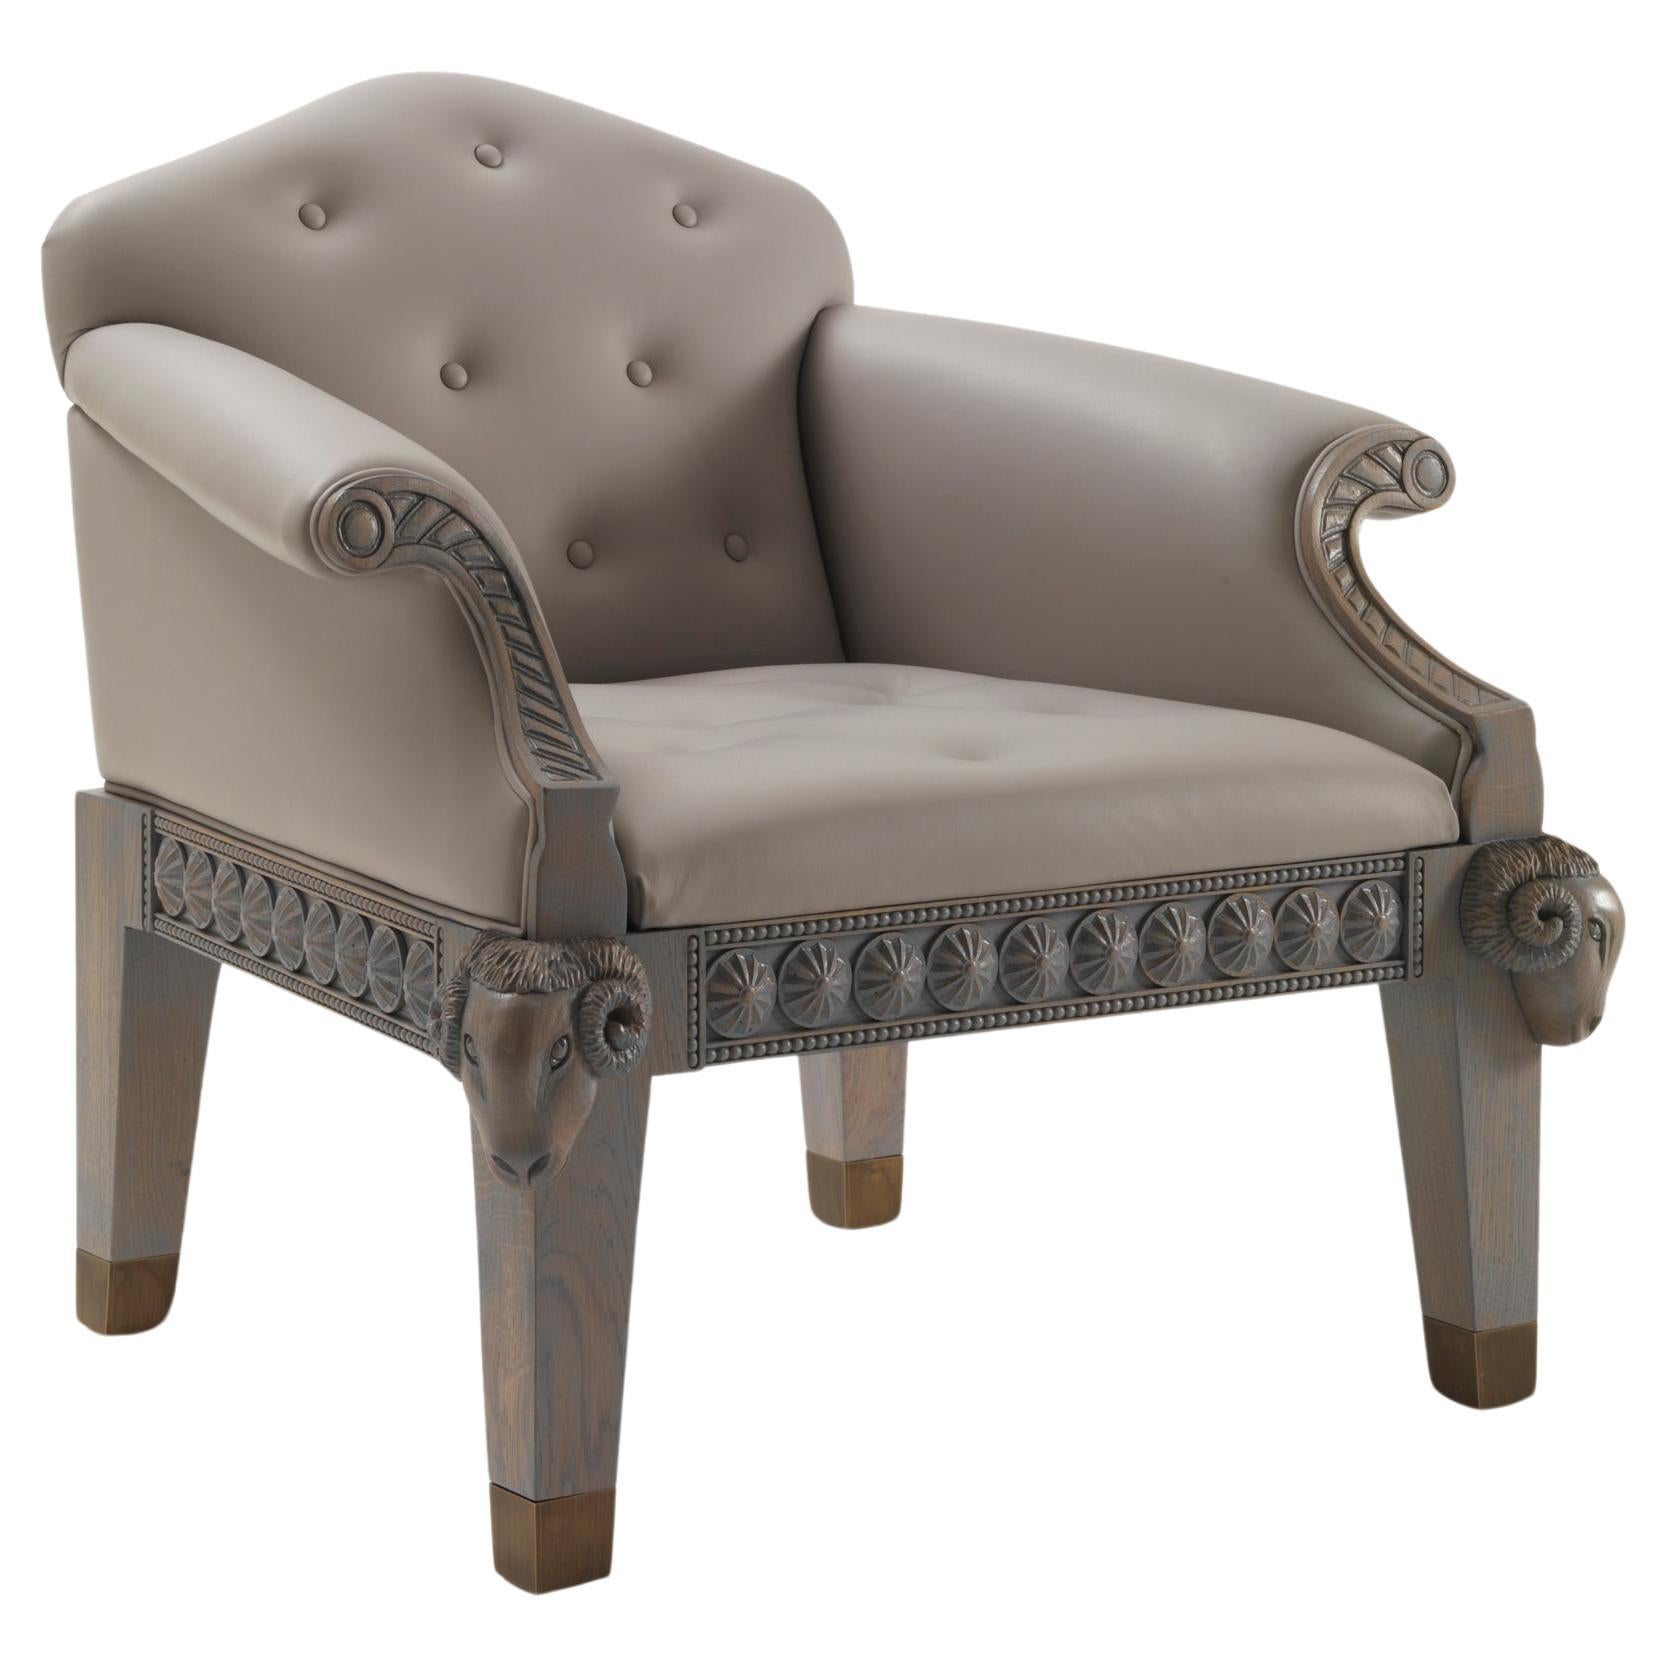 Formidable Beast Gray Oak Armchair with Buttons - Wooden Rams and Tips For Sale